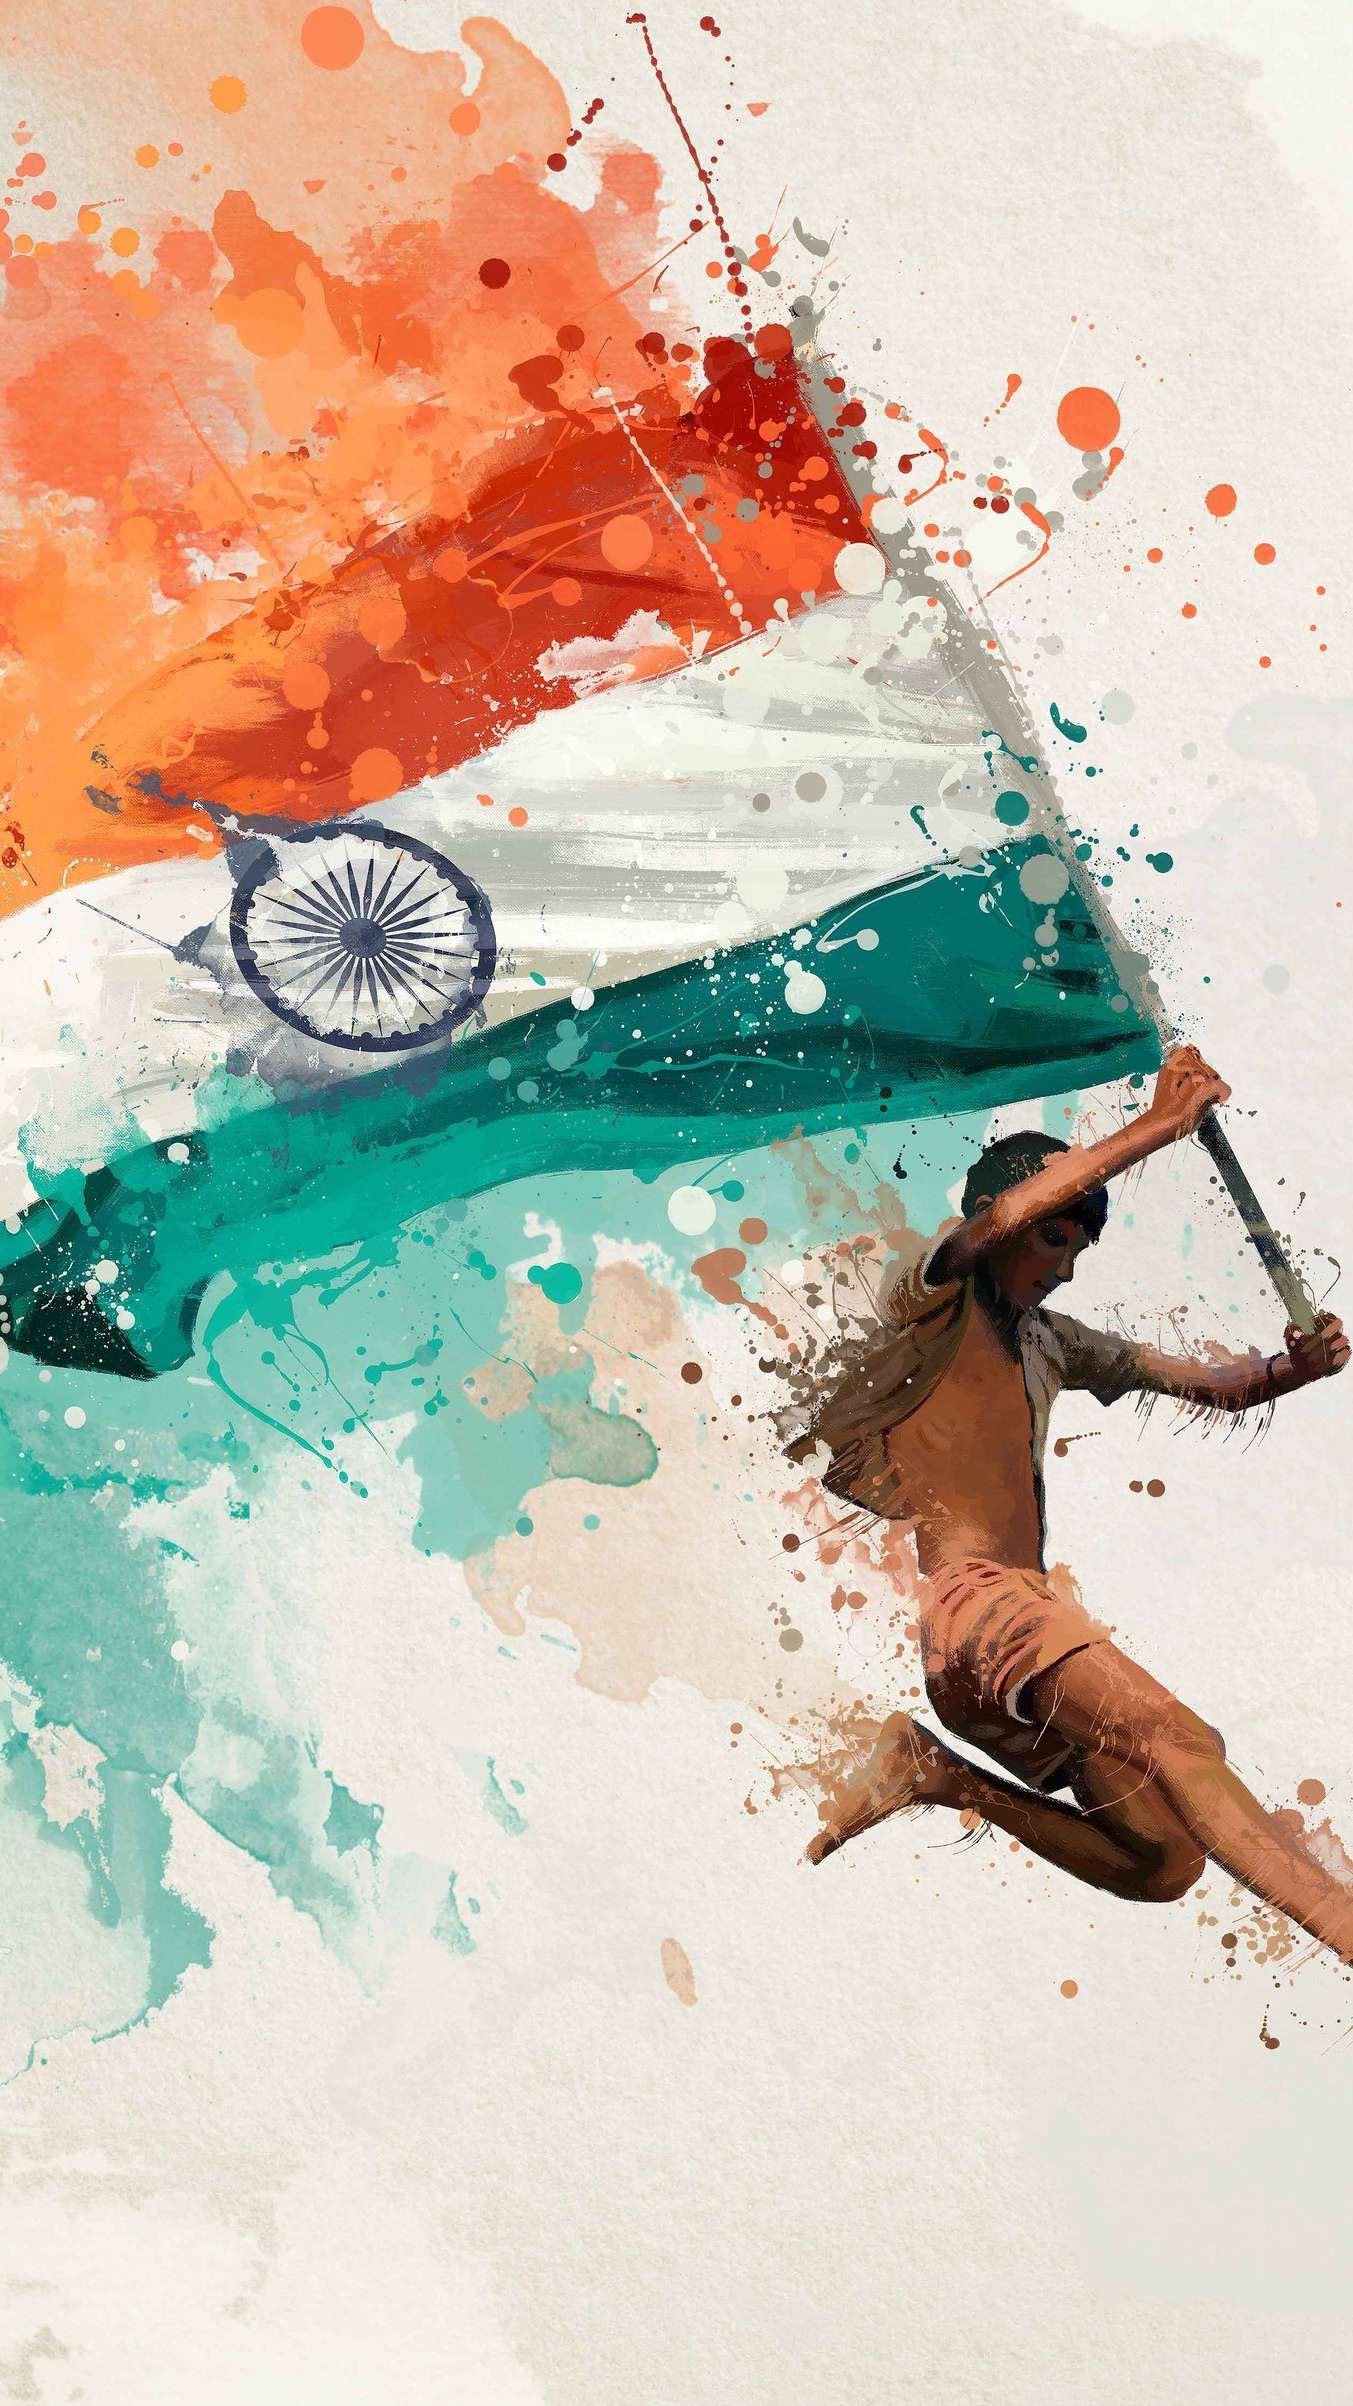 Indian Independence Day Art - HD Wallpaper 